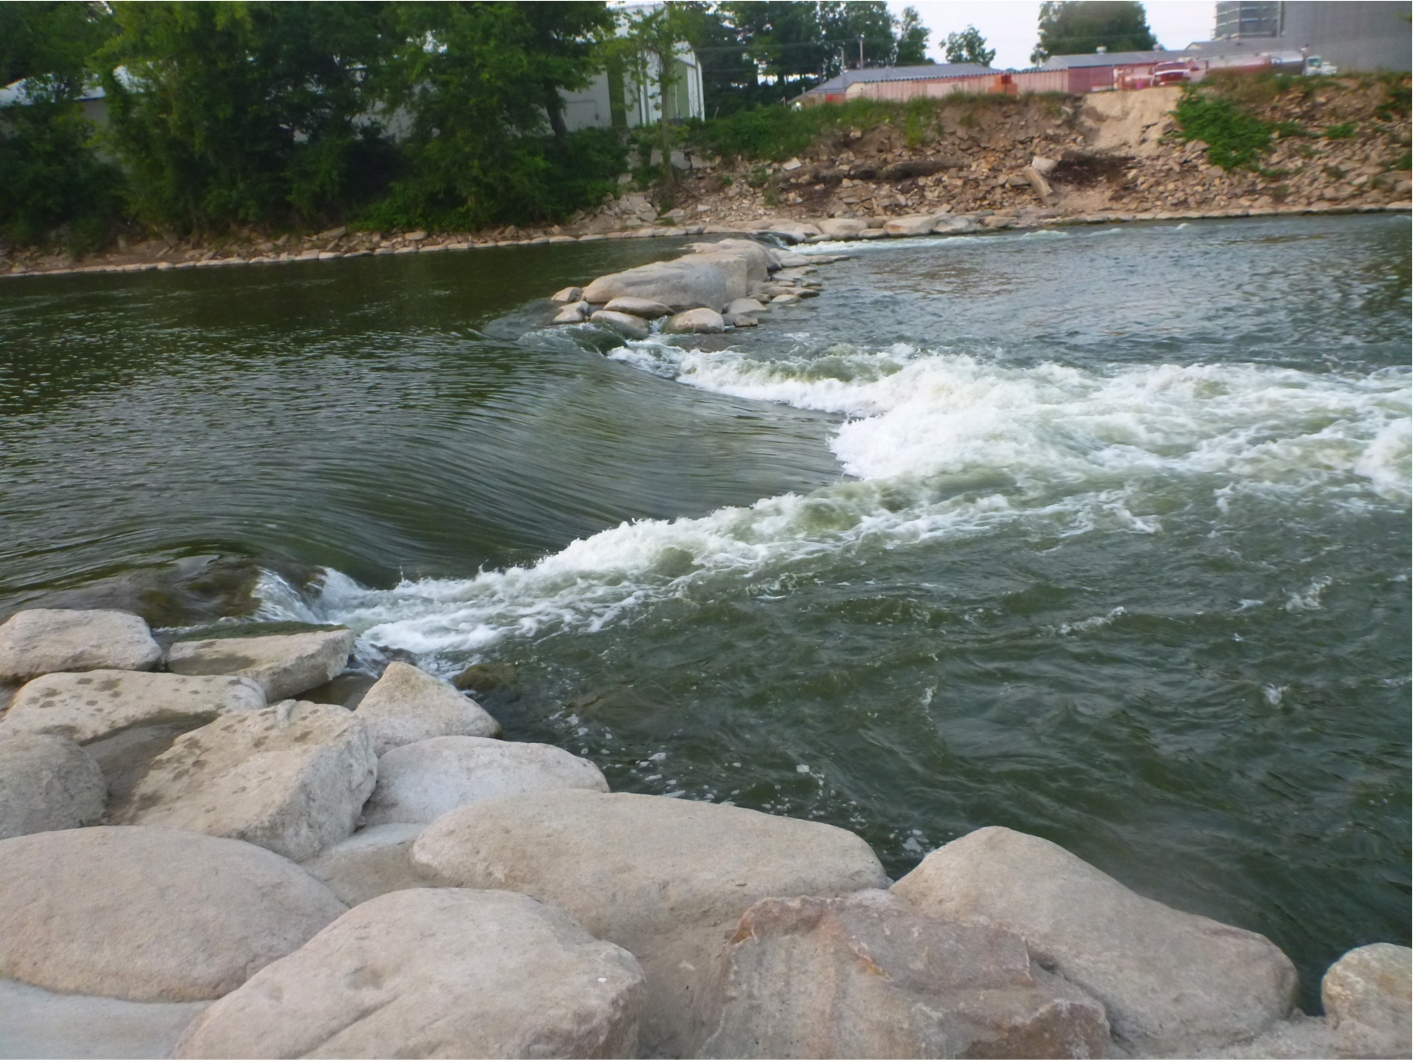 View of the Gobbler whitewater feature